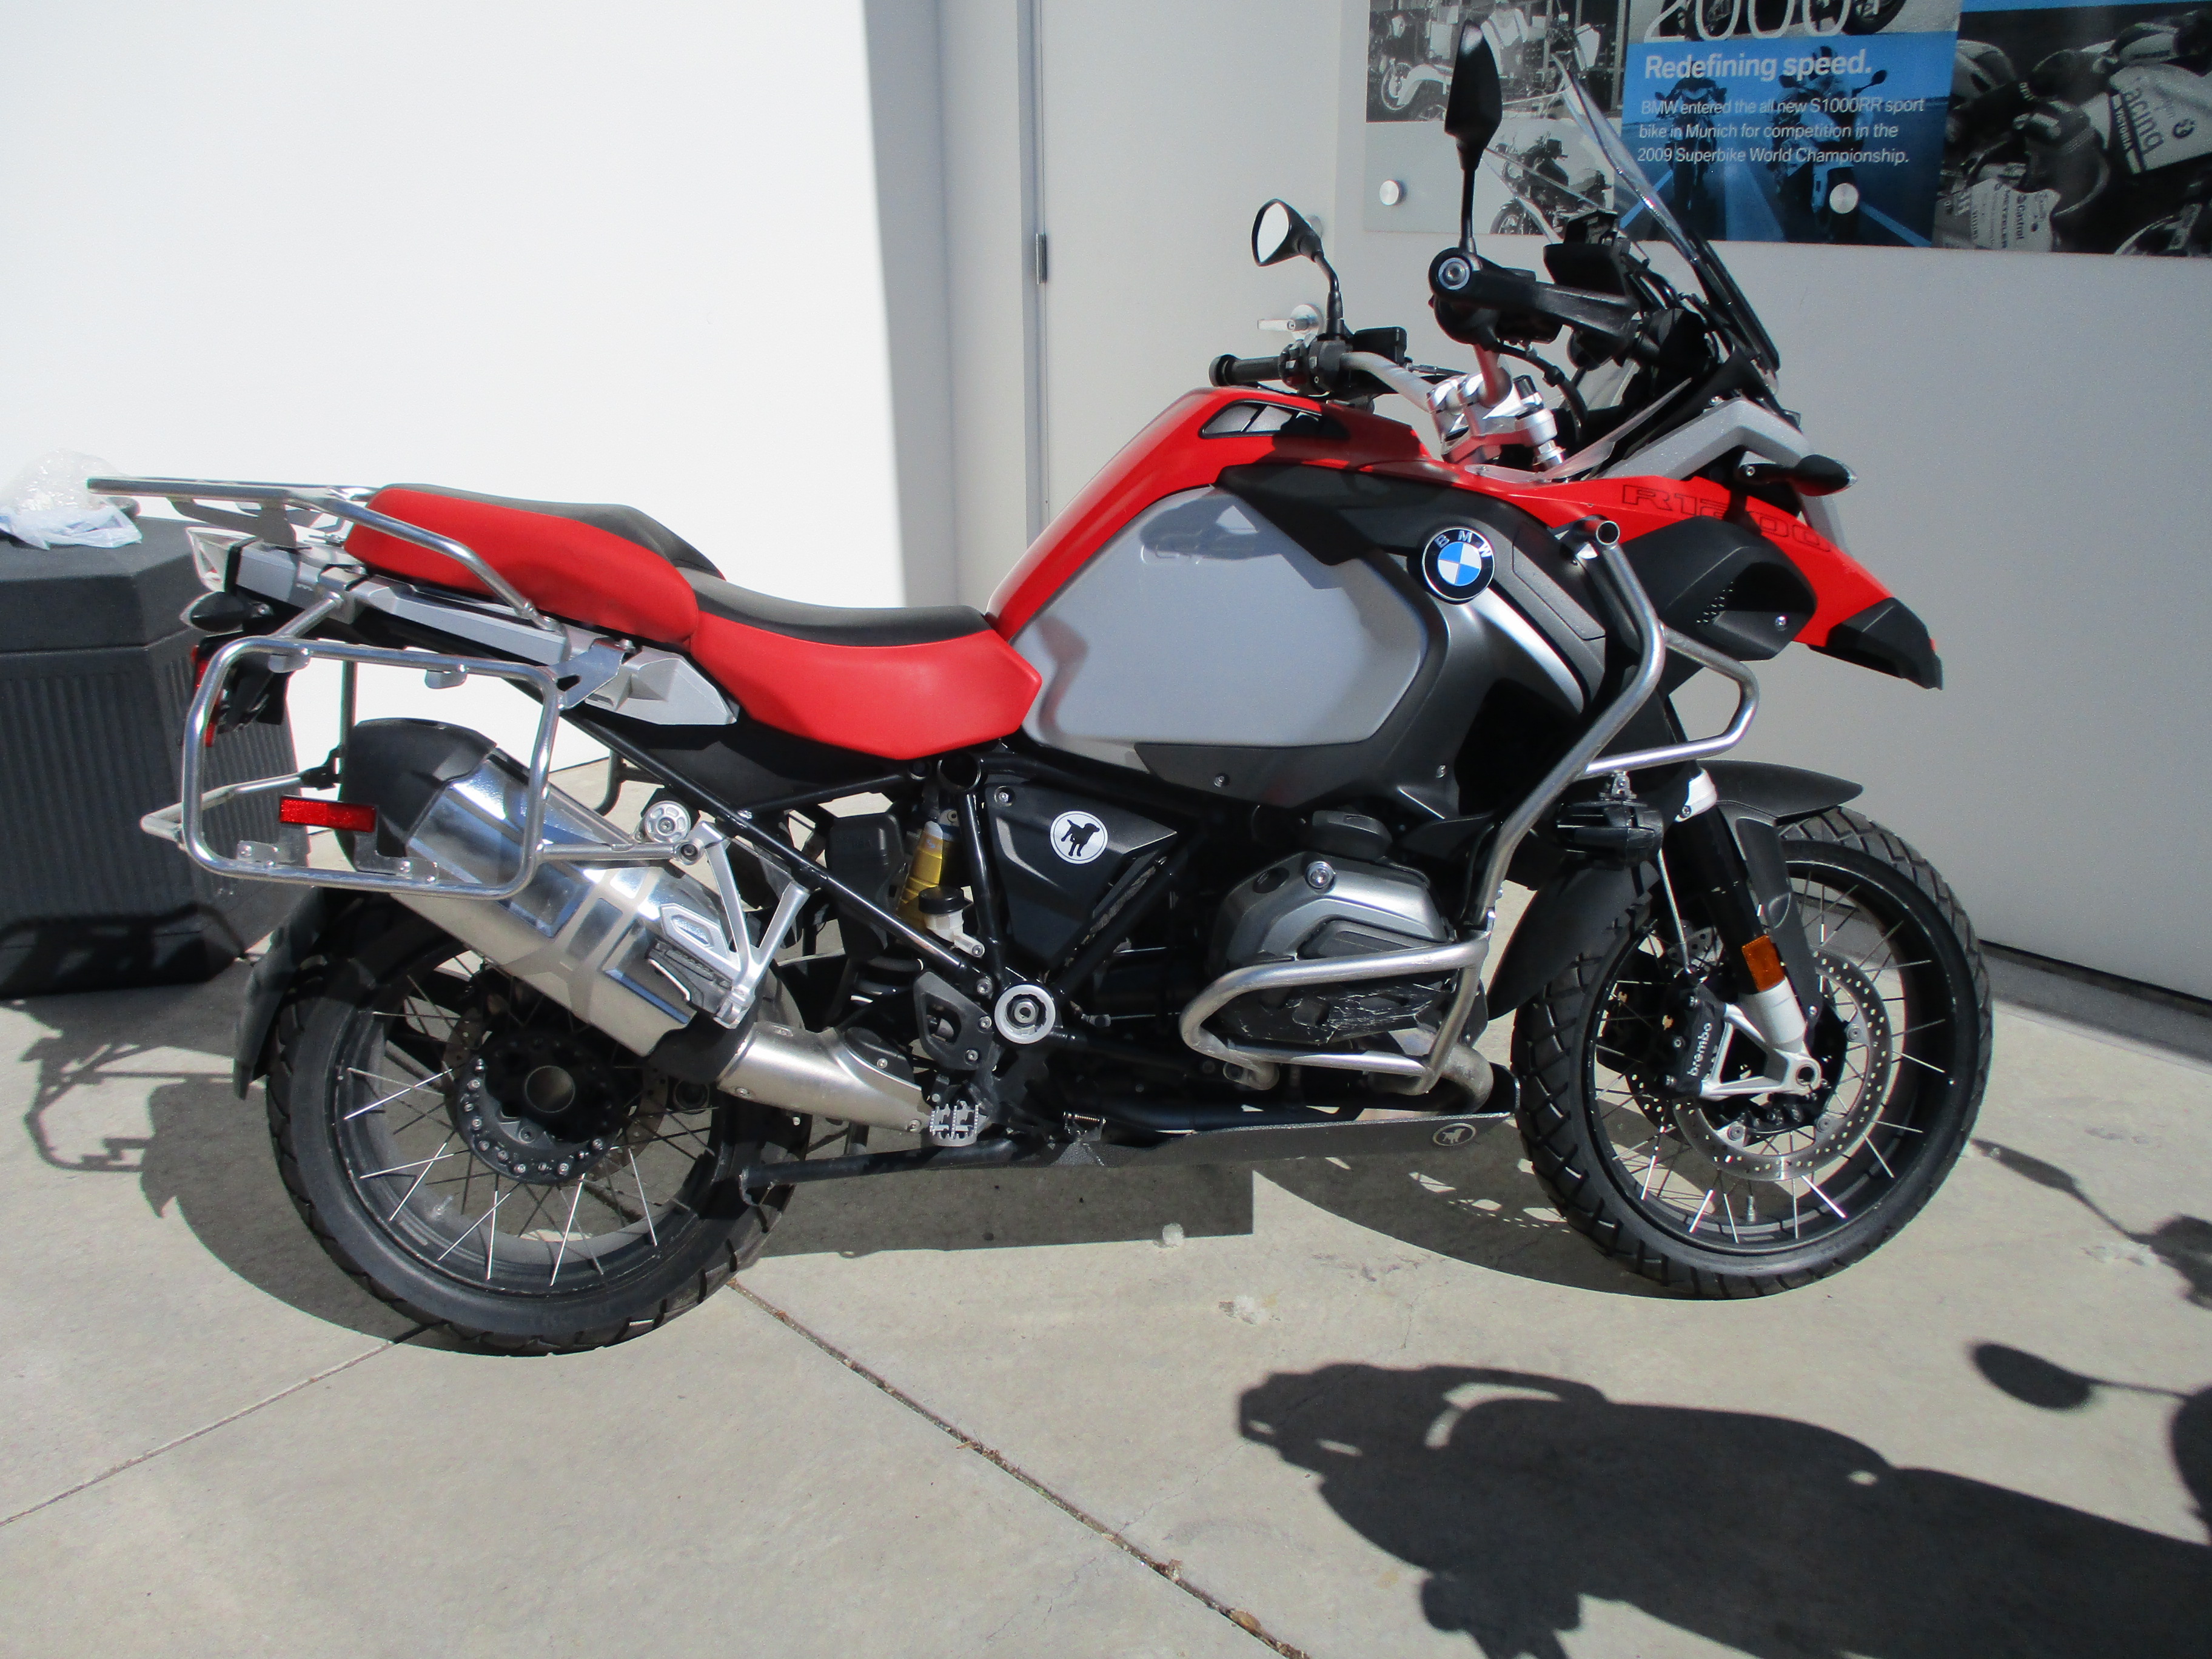 Bmw Motorcycle Dealer Albuquerque / New Motorcycle Inventory - R1250GS - Sandia BMW - This